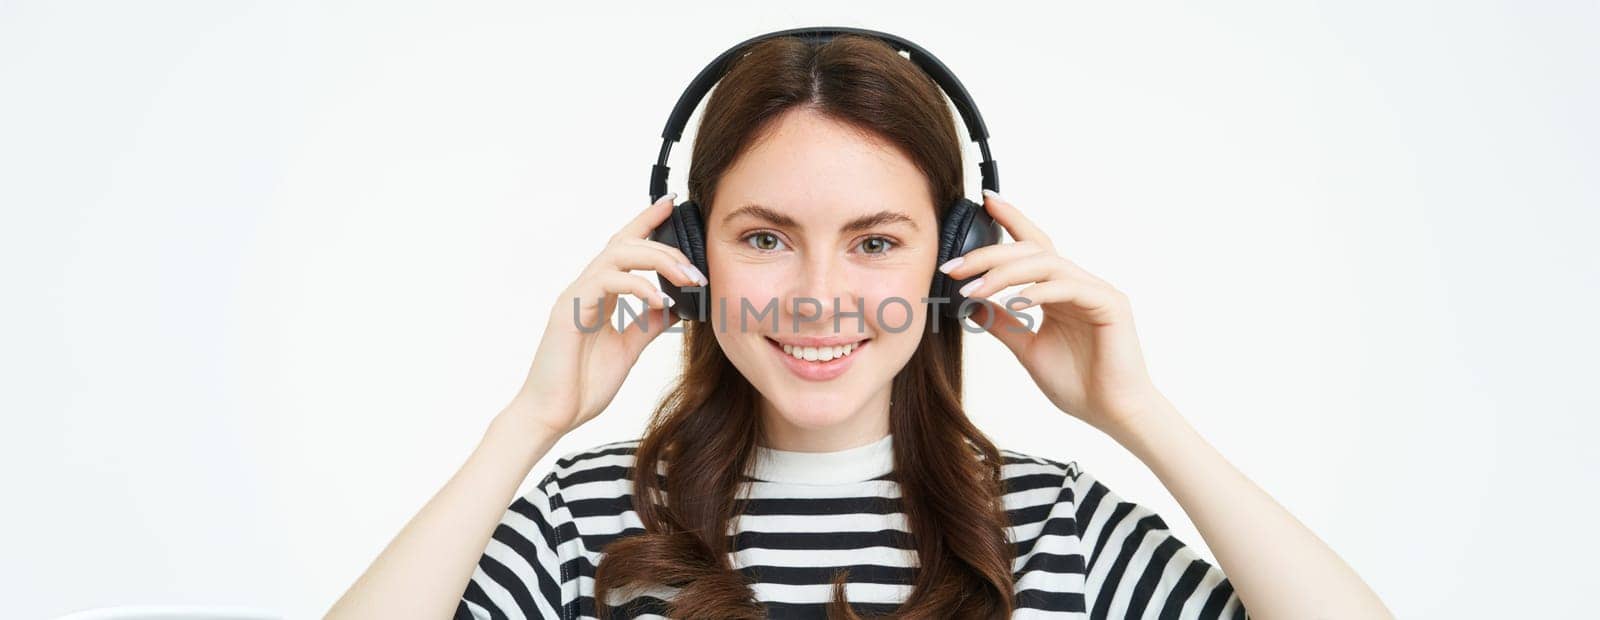 Portrait of woman, smiling, wearing wireless headphones, listening music, studying in earphones, standing isolated over white background.